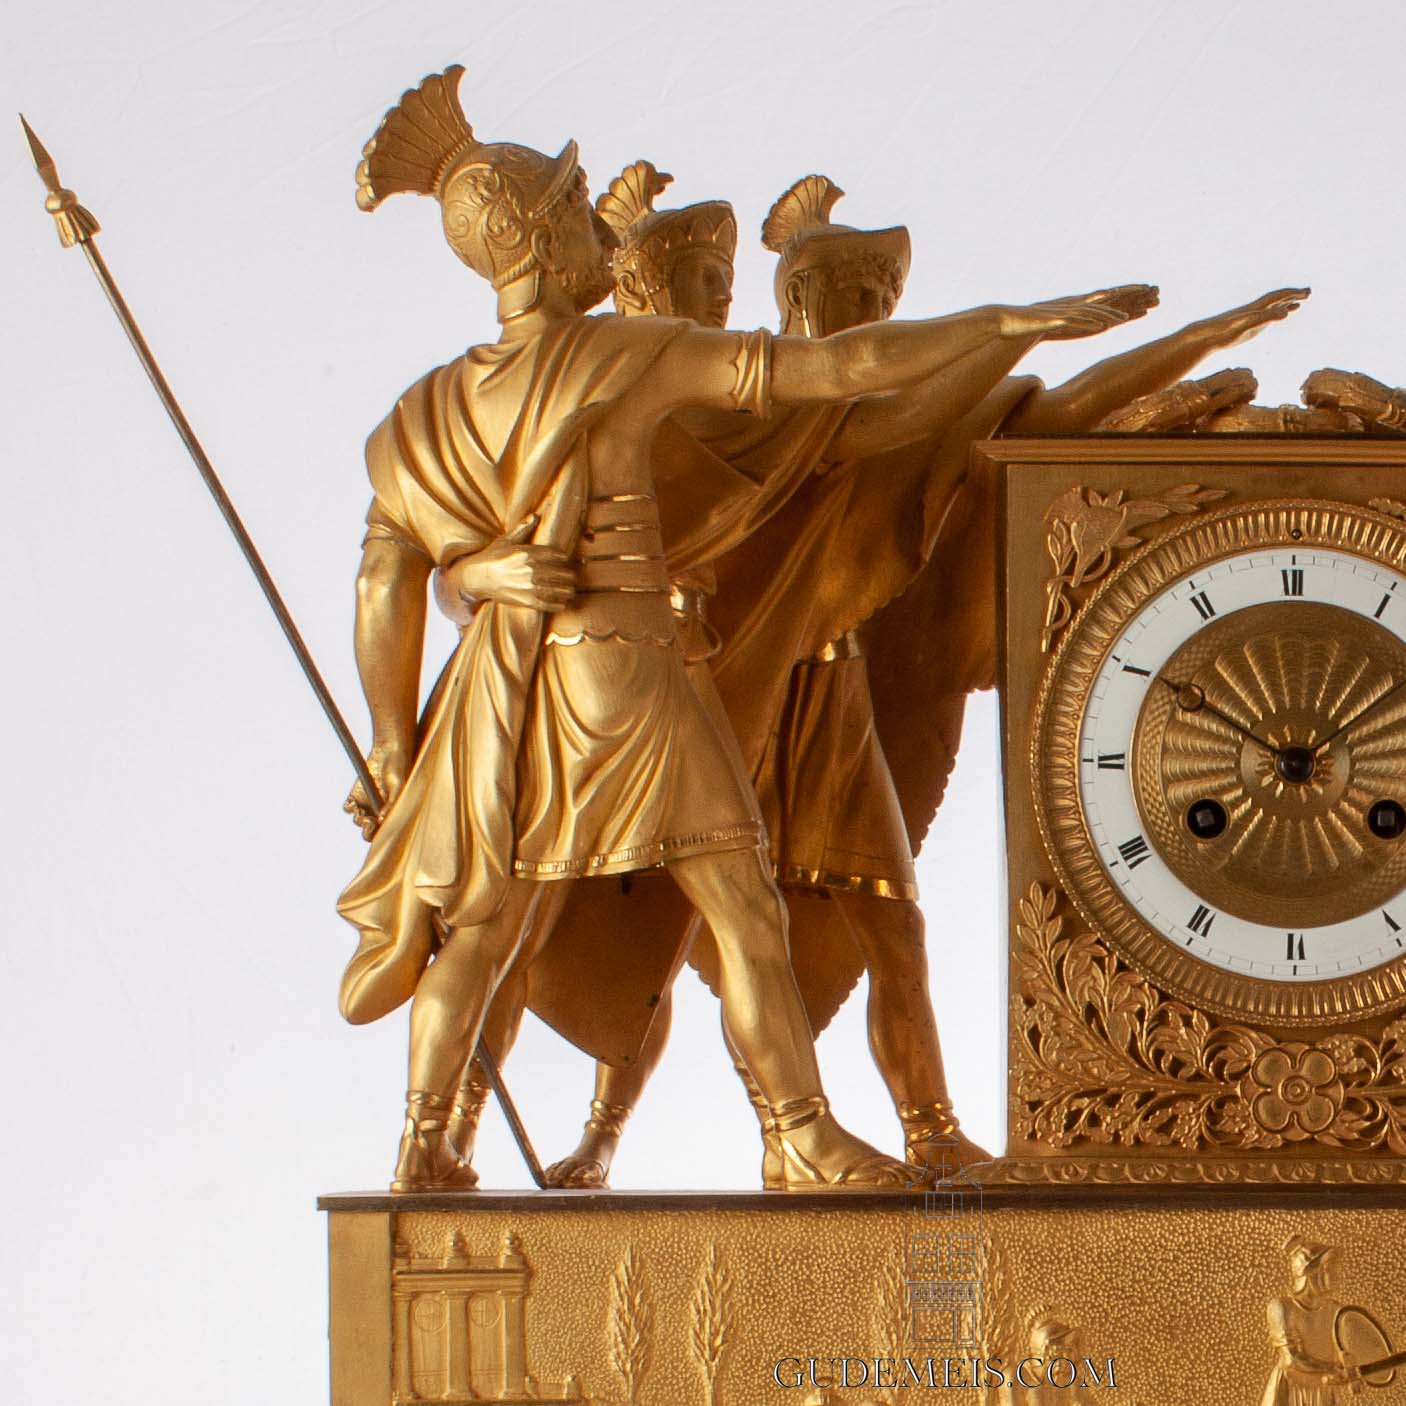 Oath-of-the-horatii-French-Empire-sculptural-gilt-bronze-striking-antique-clock-Jacques-Louis-David